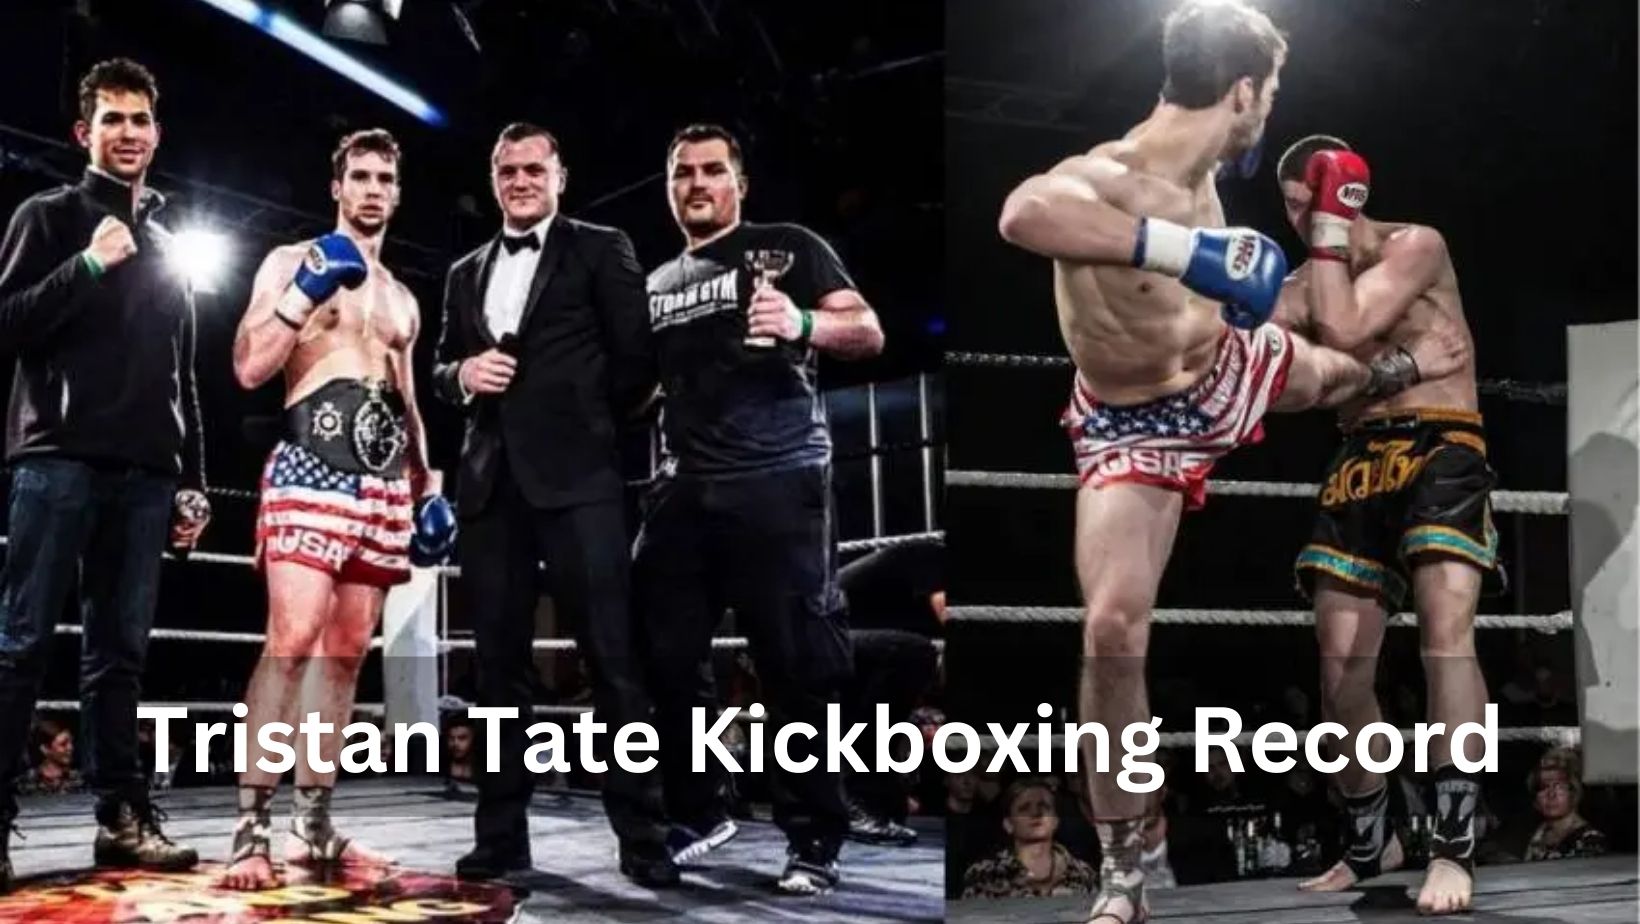 Tristan Tate: The Life and Philosophy of Formal Kickboxing